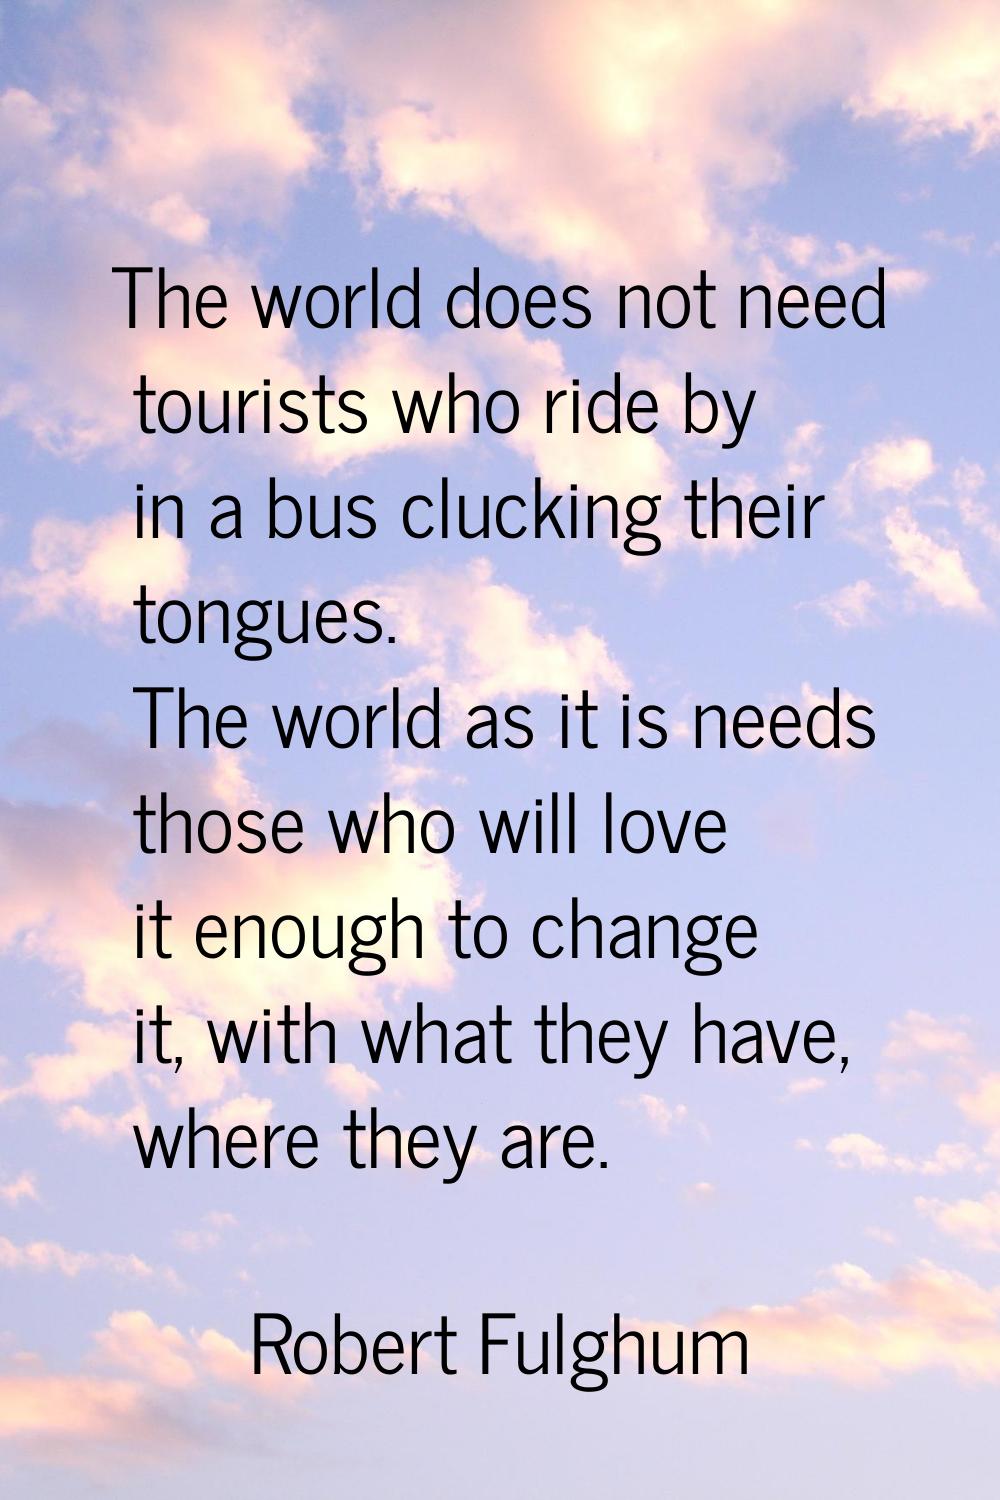 The world does not need tourists who ride by in a bus clucking their tongues. The world as it is ne